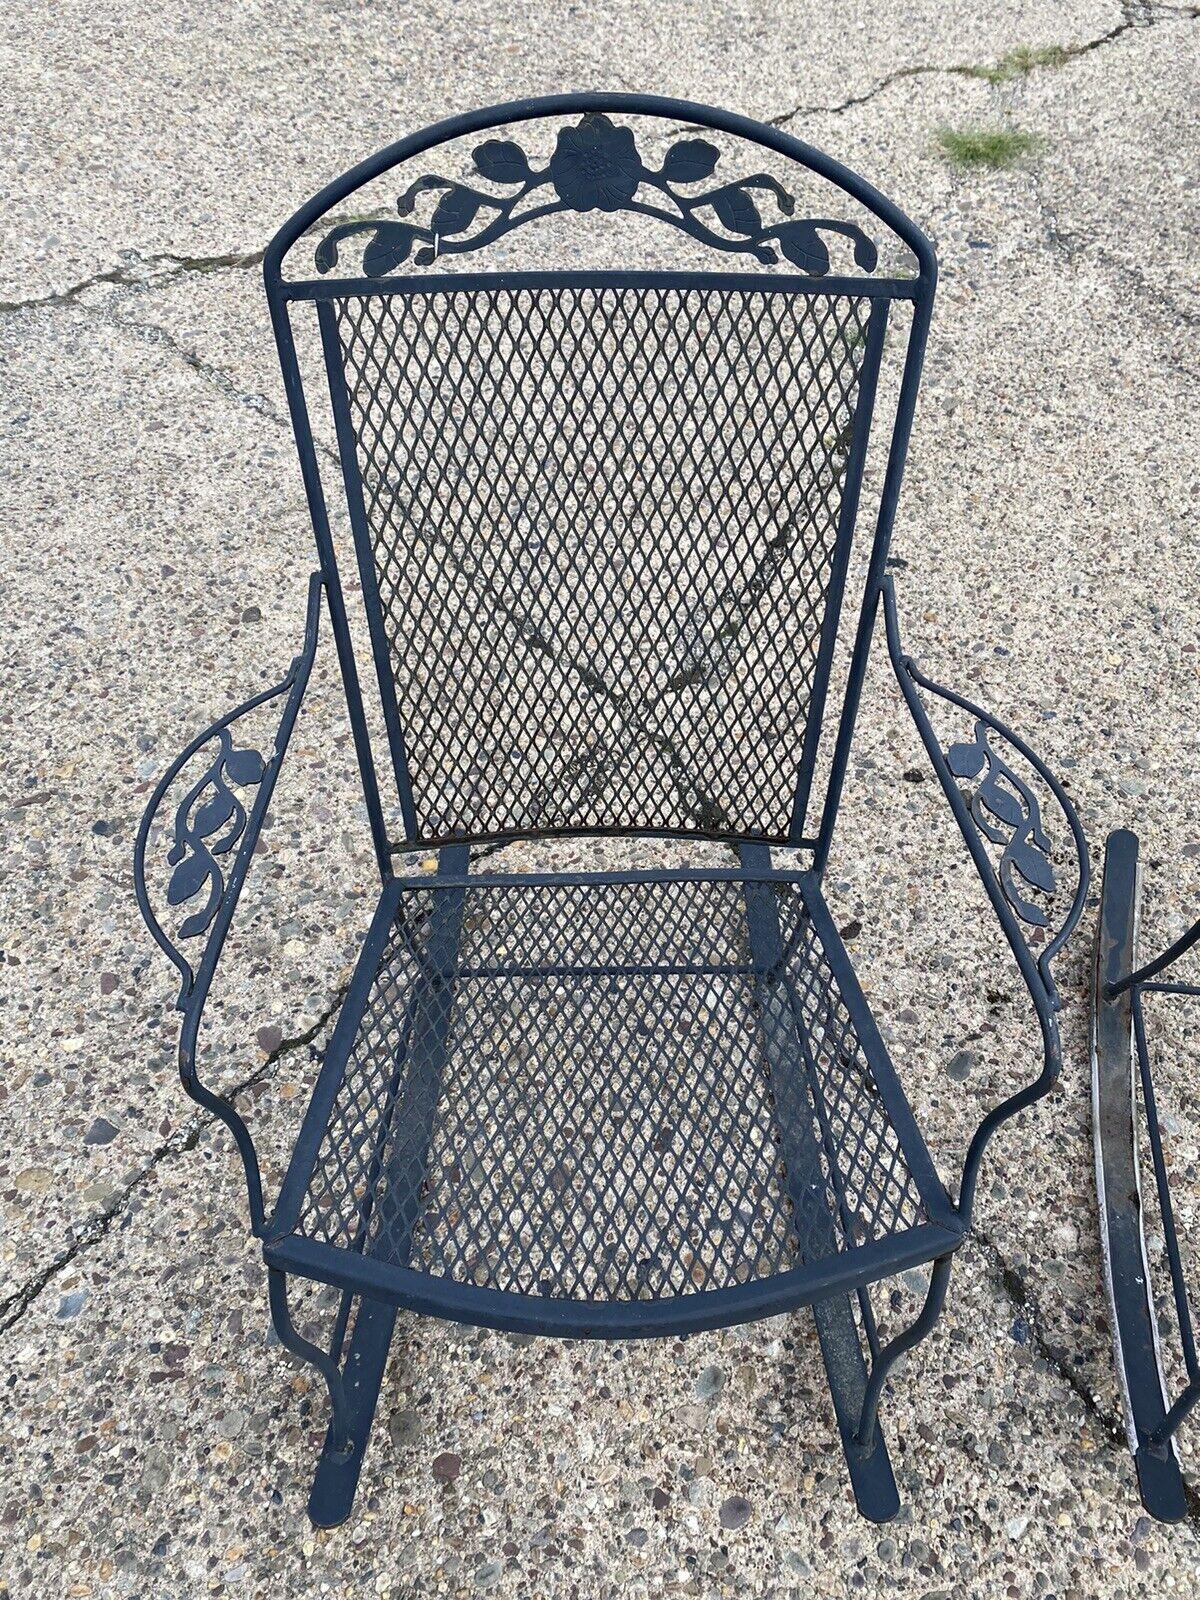 Vintage Wrought Iron Victorian Style Garden Patio Rocker Rocking Chairs - a Pair For Sale 3